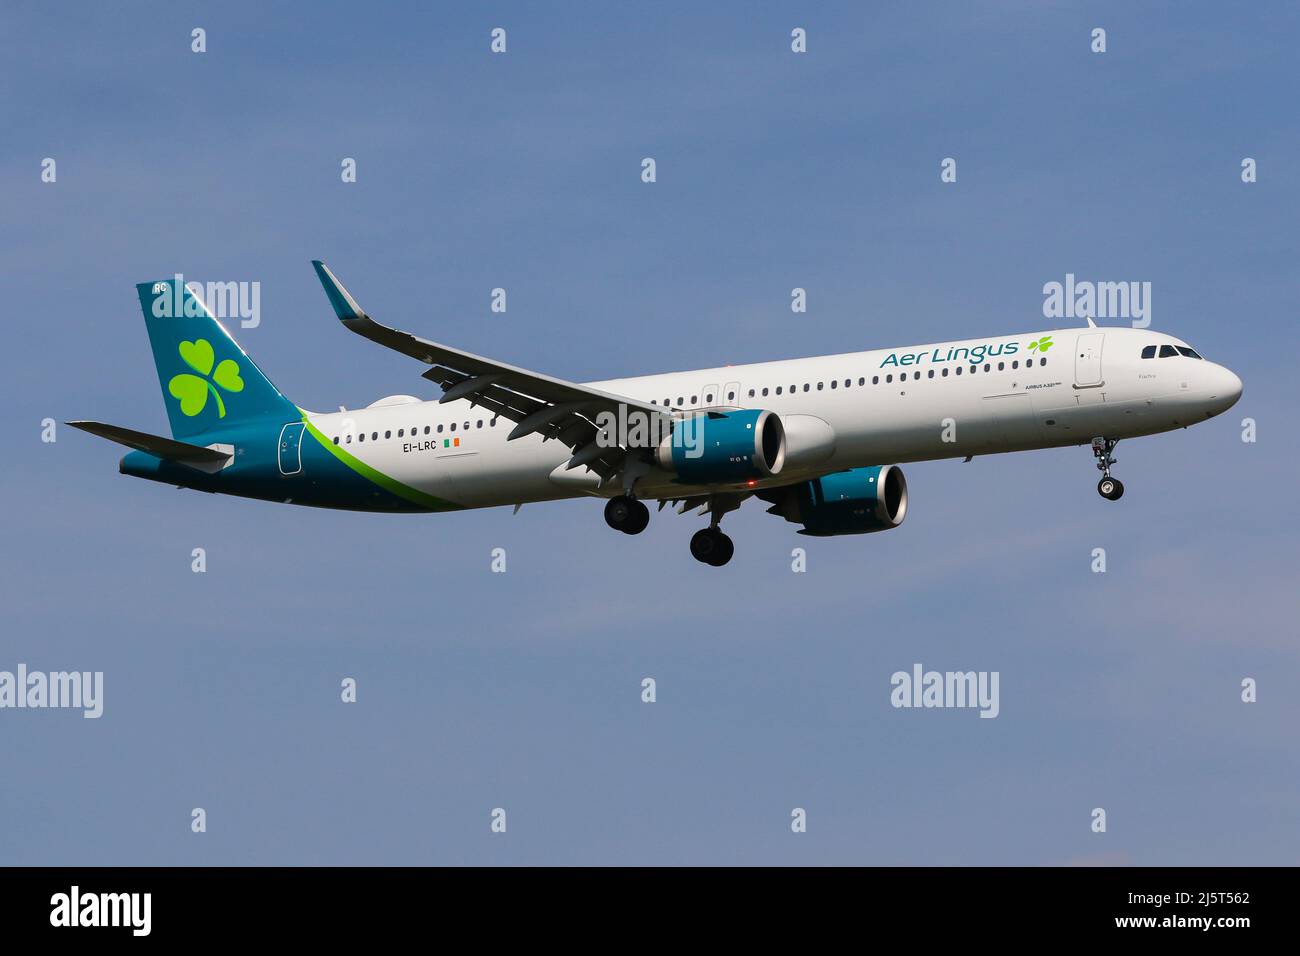 An Airbus A321 NEO operated by Aer Lingus arrives at London Heathrow Airport Stock Photo